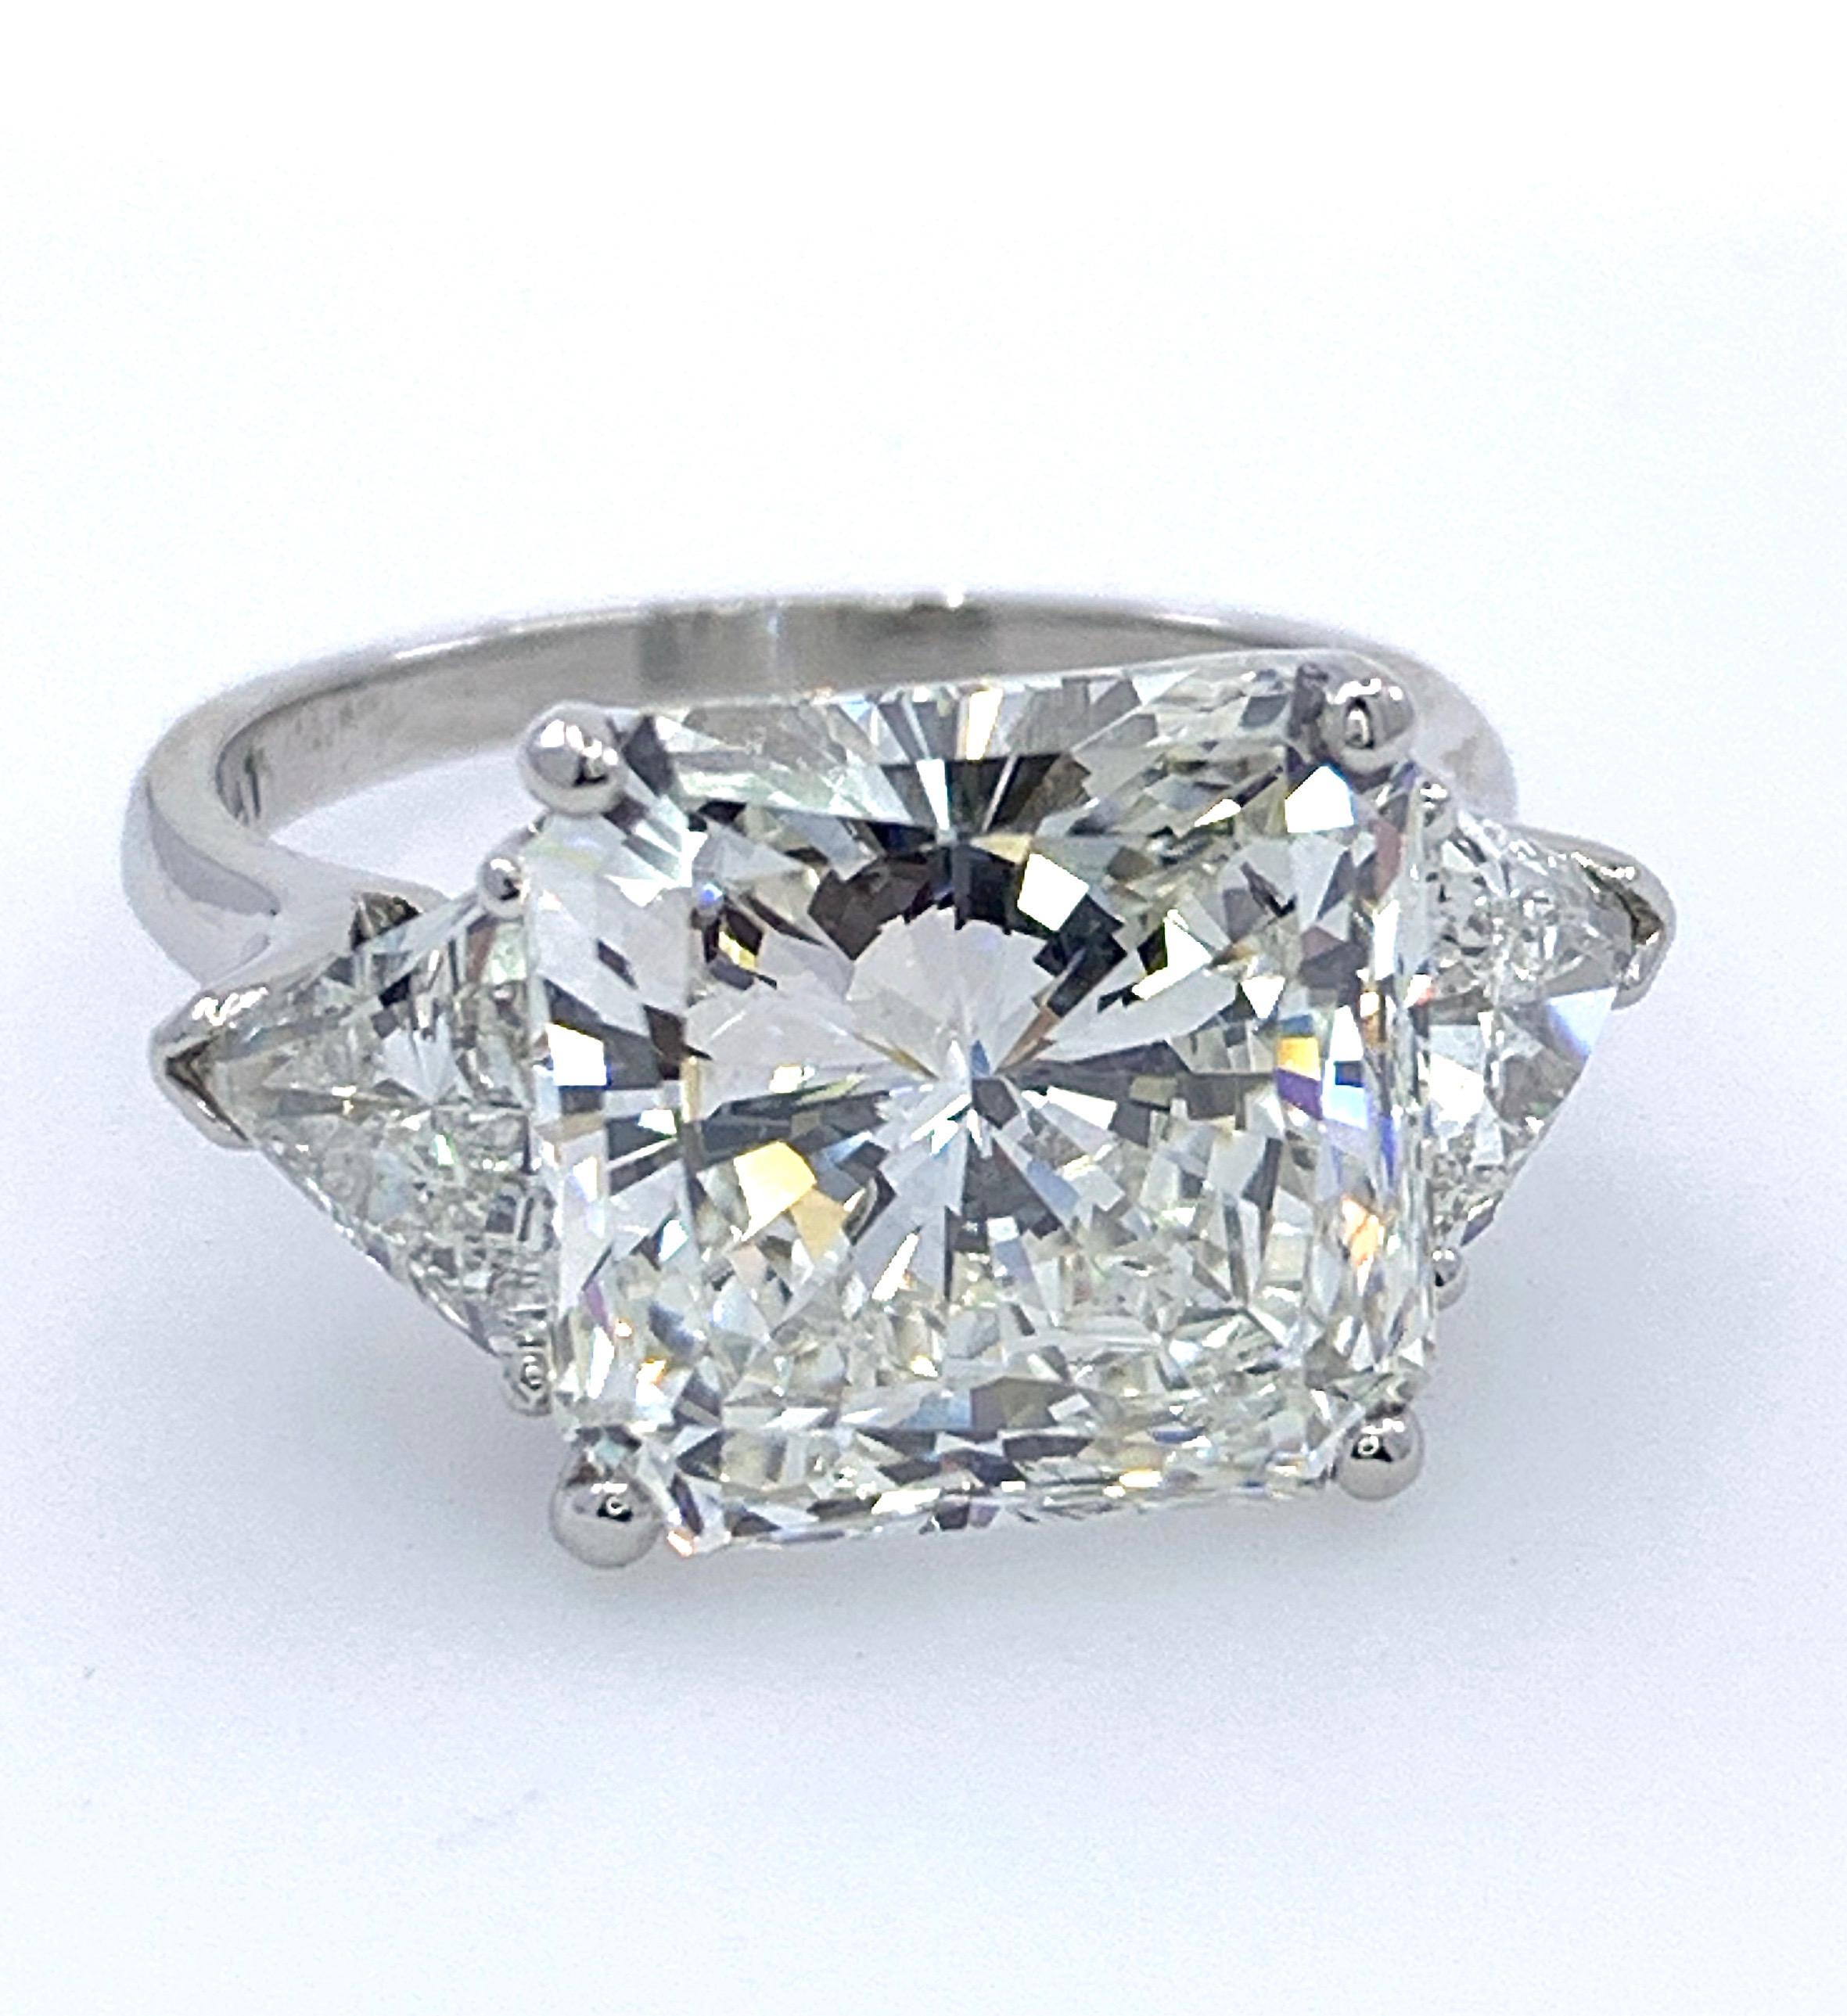 This important ring, made in 2009,  features a very slightly elongated, cut-cornered square (i.e., Radiant) diamond prong-set between two trillions in a handmade platinum mounting. 

The center stone comes with a GIA certificate (#6204534748) rating